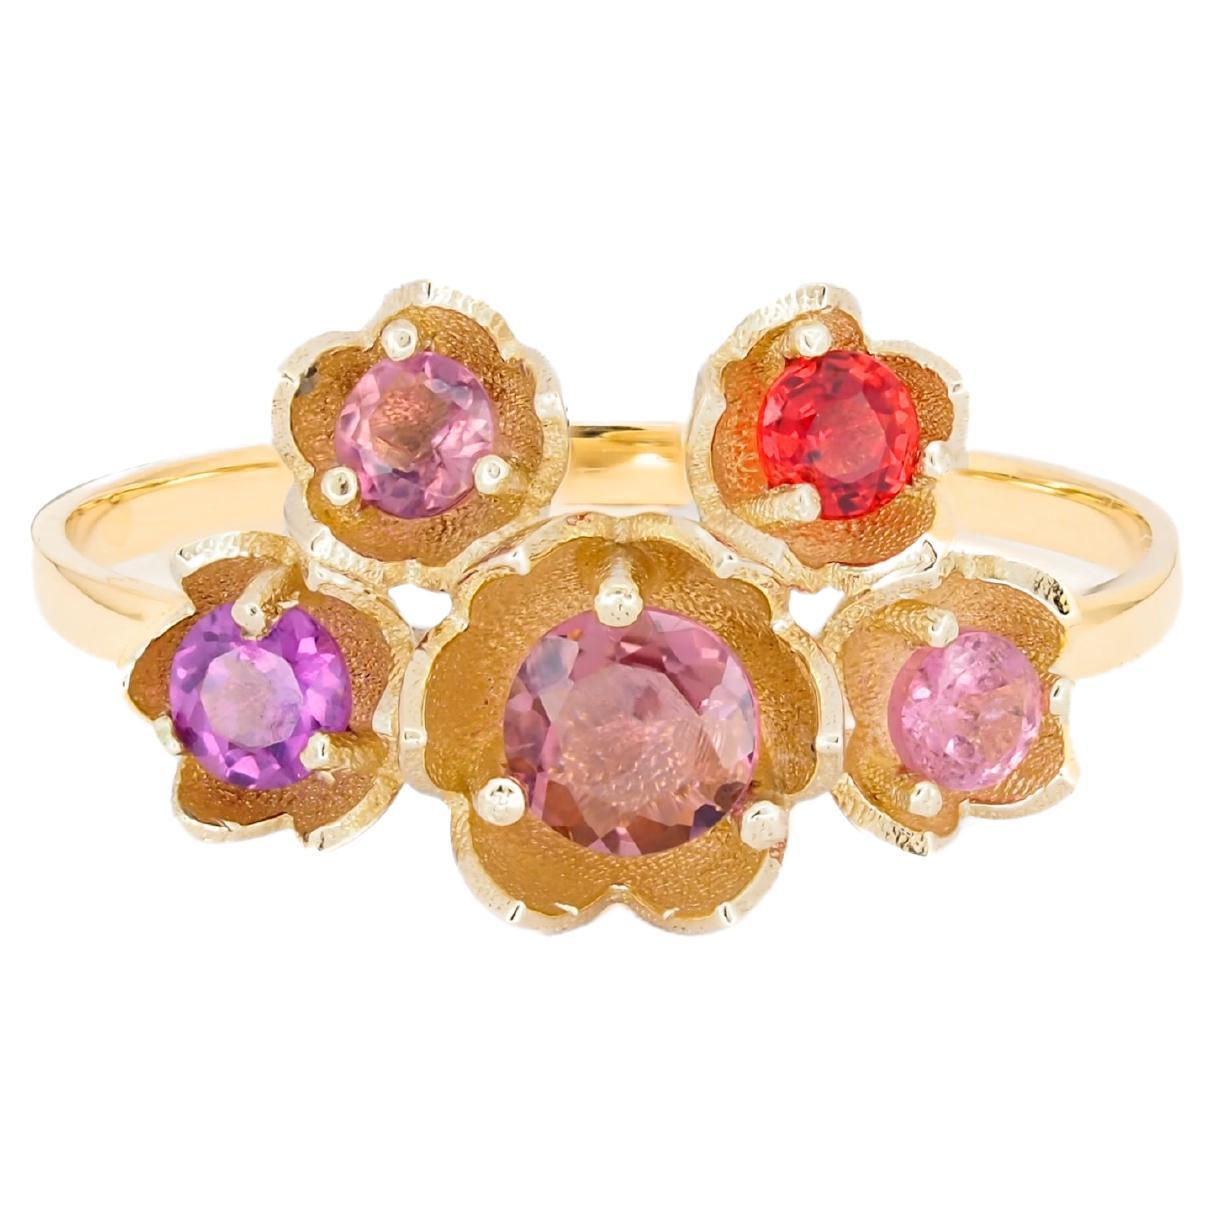 For Sale:  14 karat gold Blossom ring with multicolored gemstones. Pink Tourmaline ring